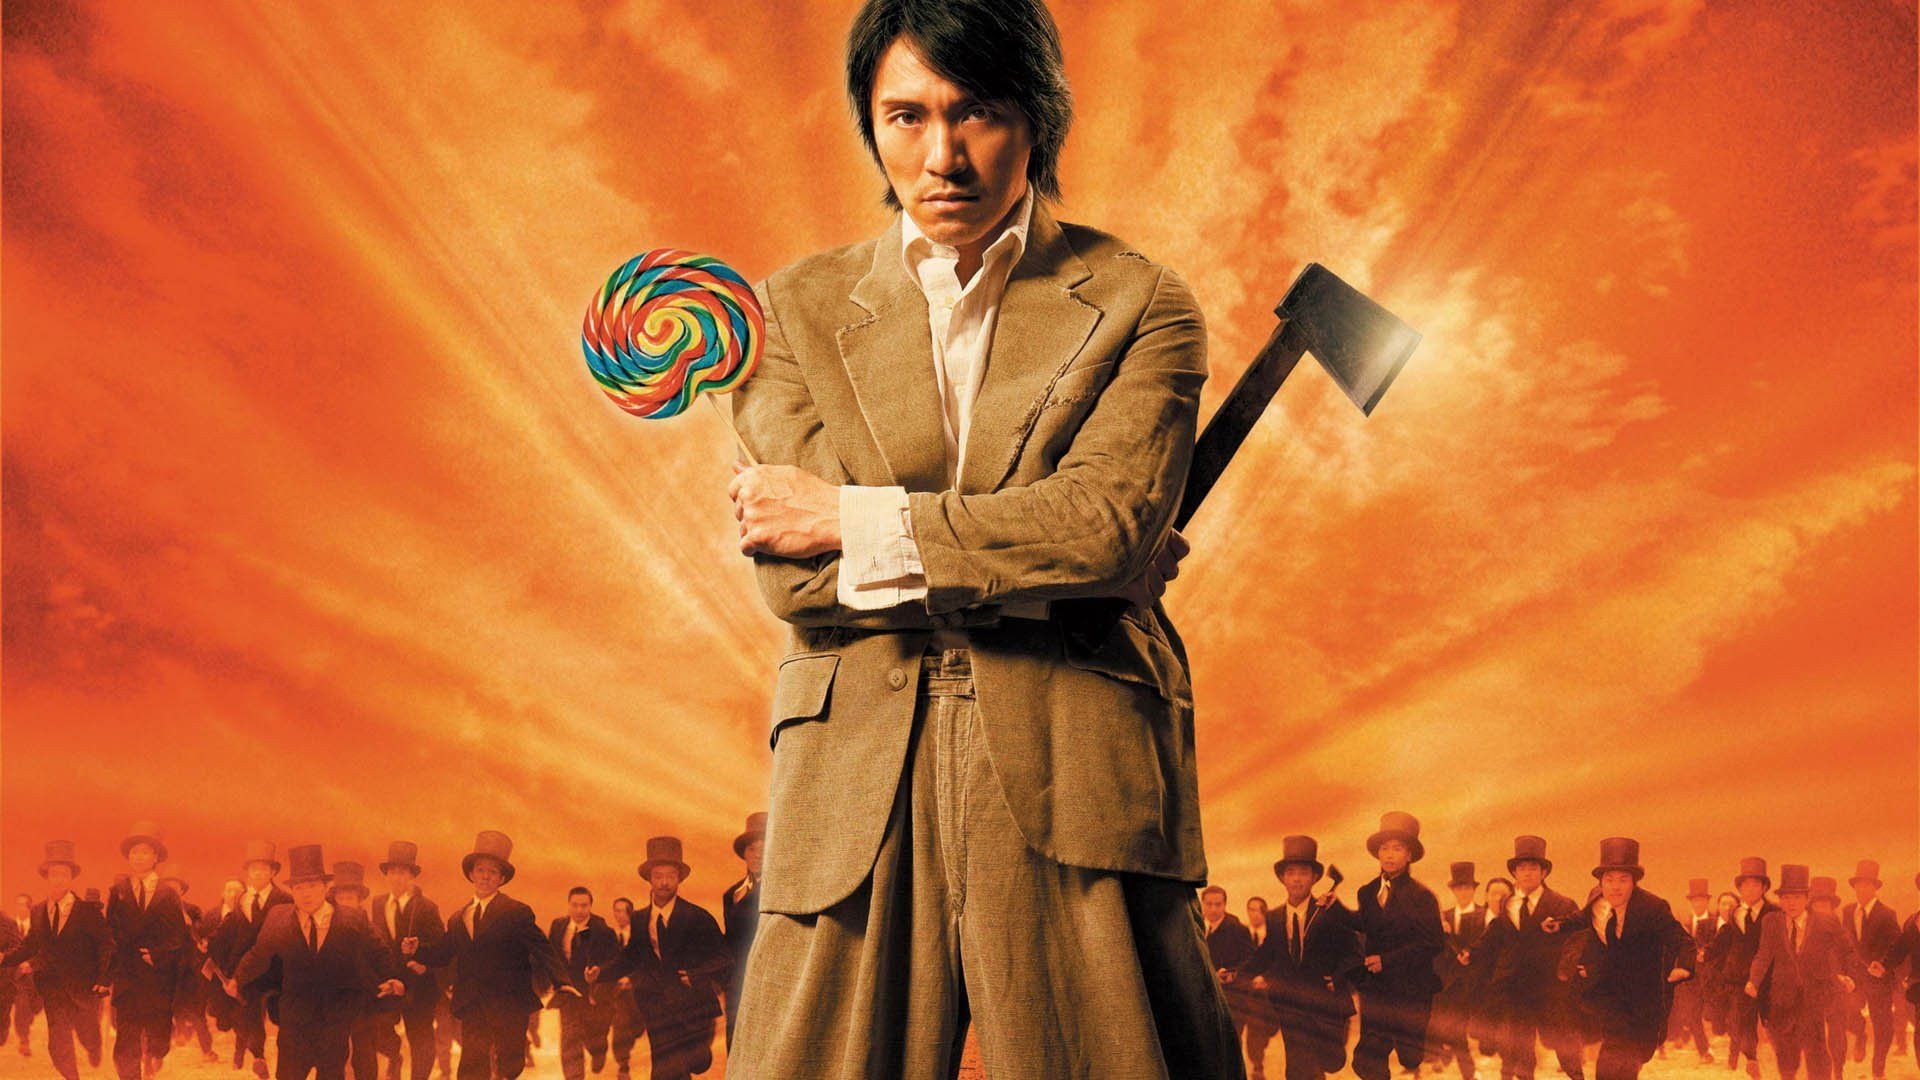 Kung Fu Hustle movie, Top free backgrounds, Action comedy, 1920x1080 Full HD Desktop